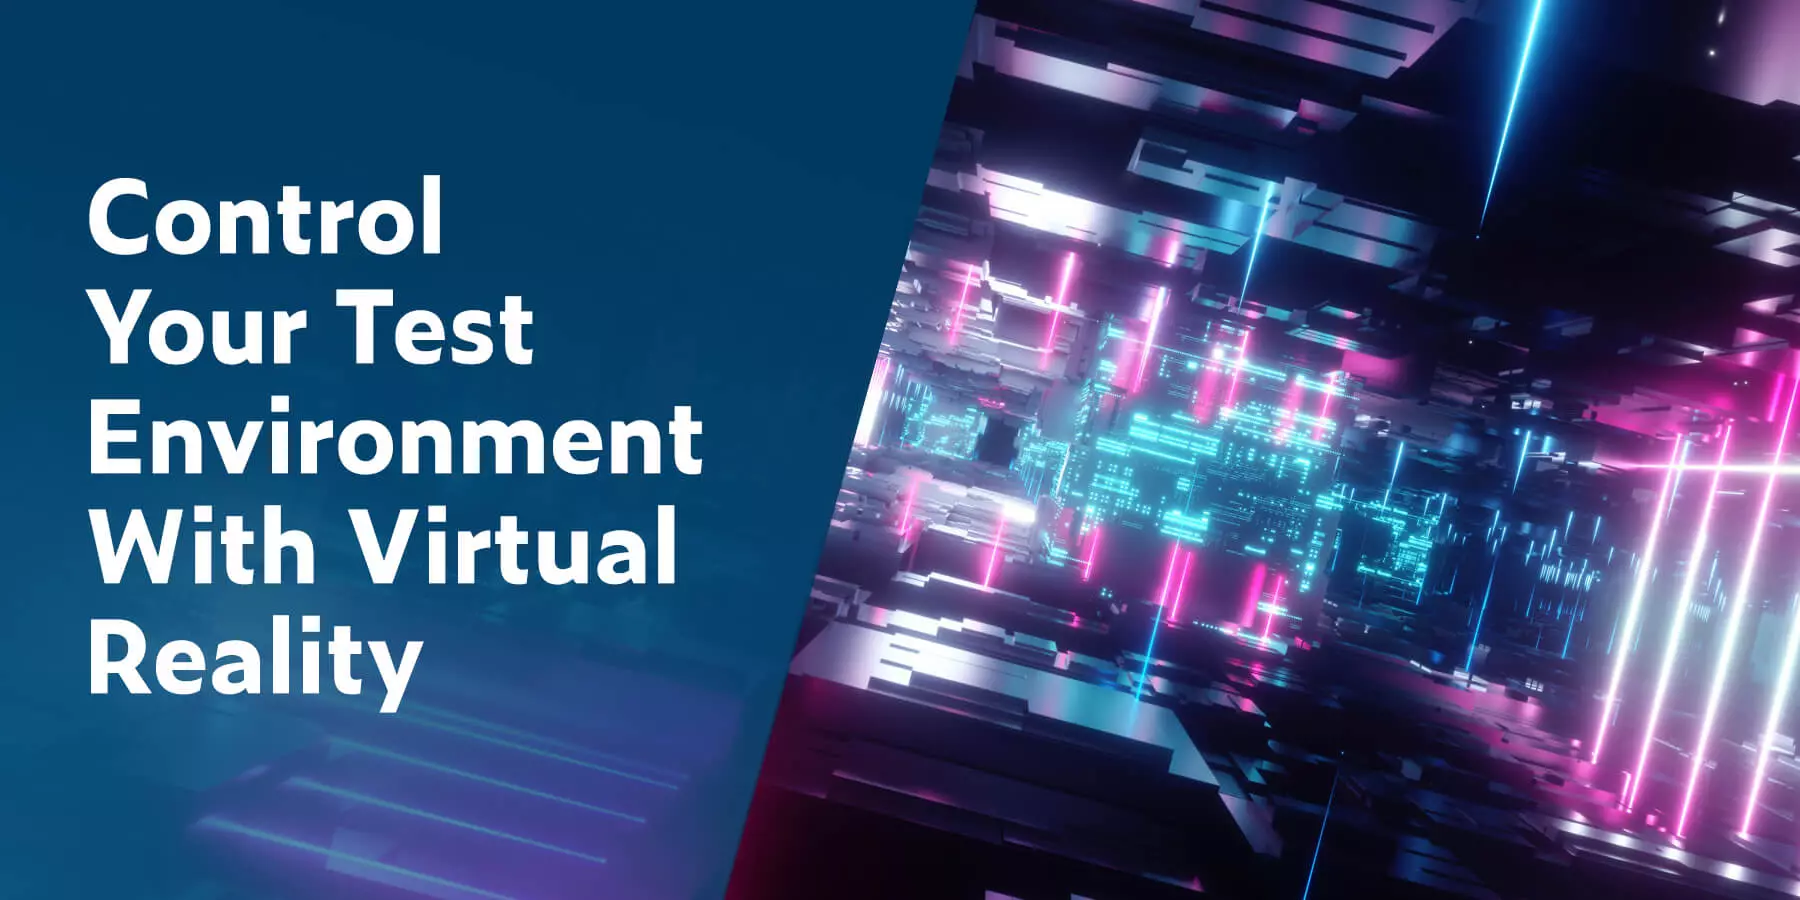 Control Your Test Environment With Virtual Reality